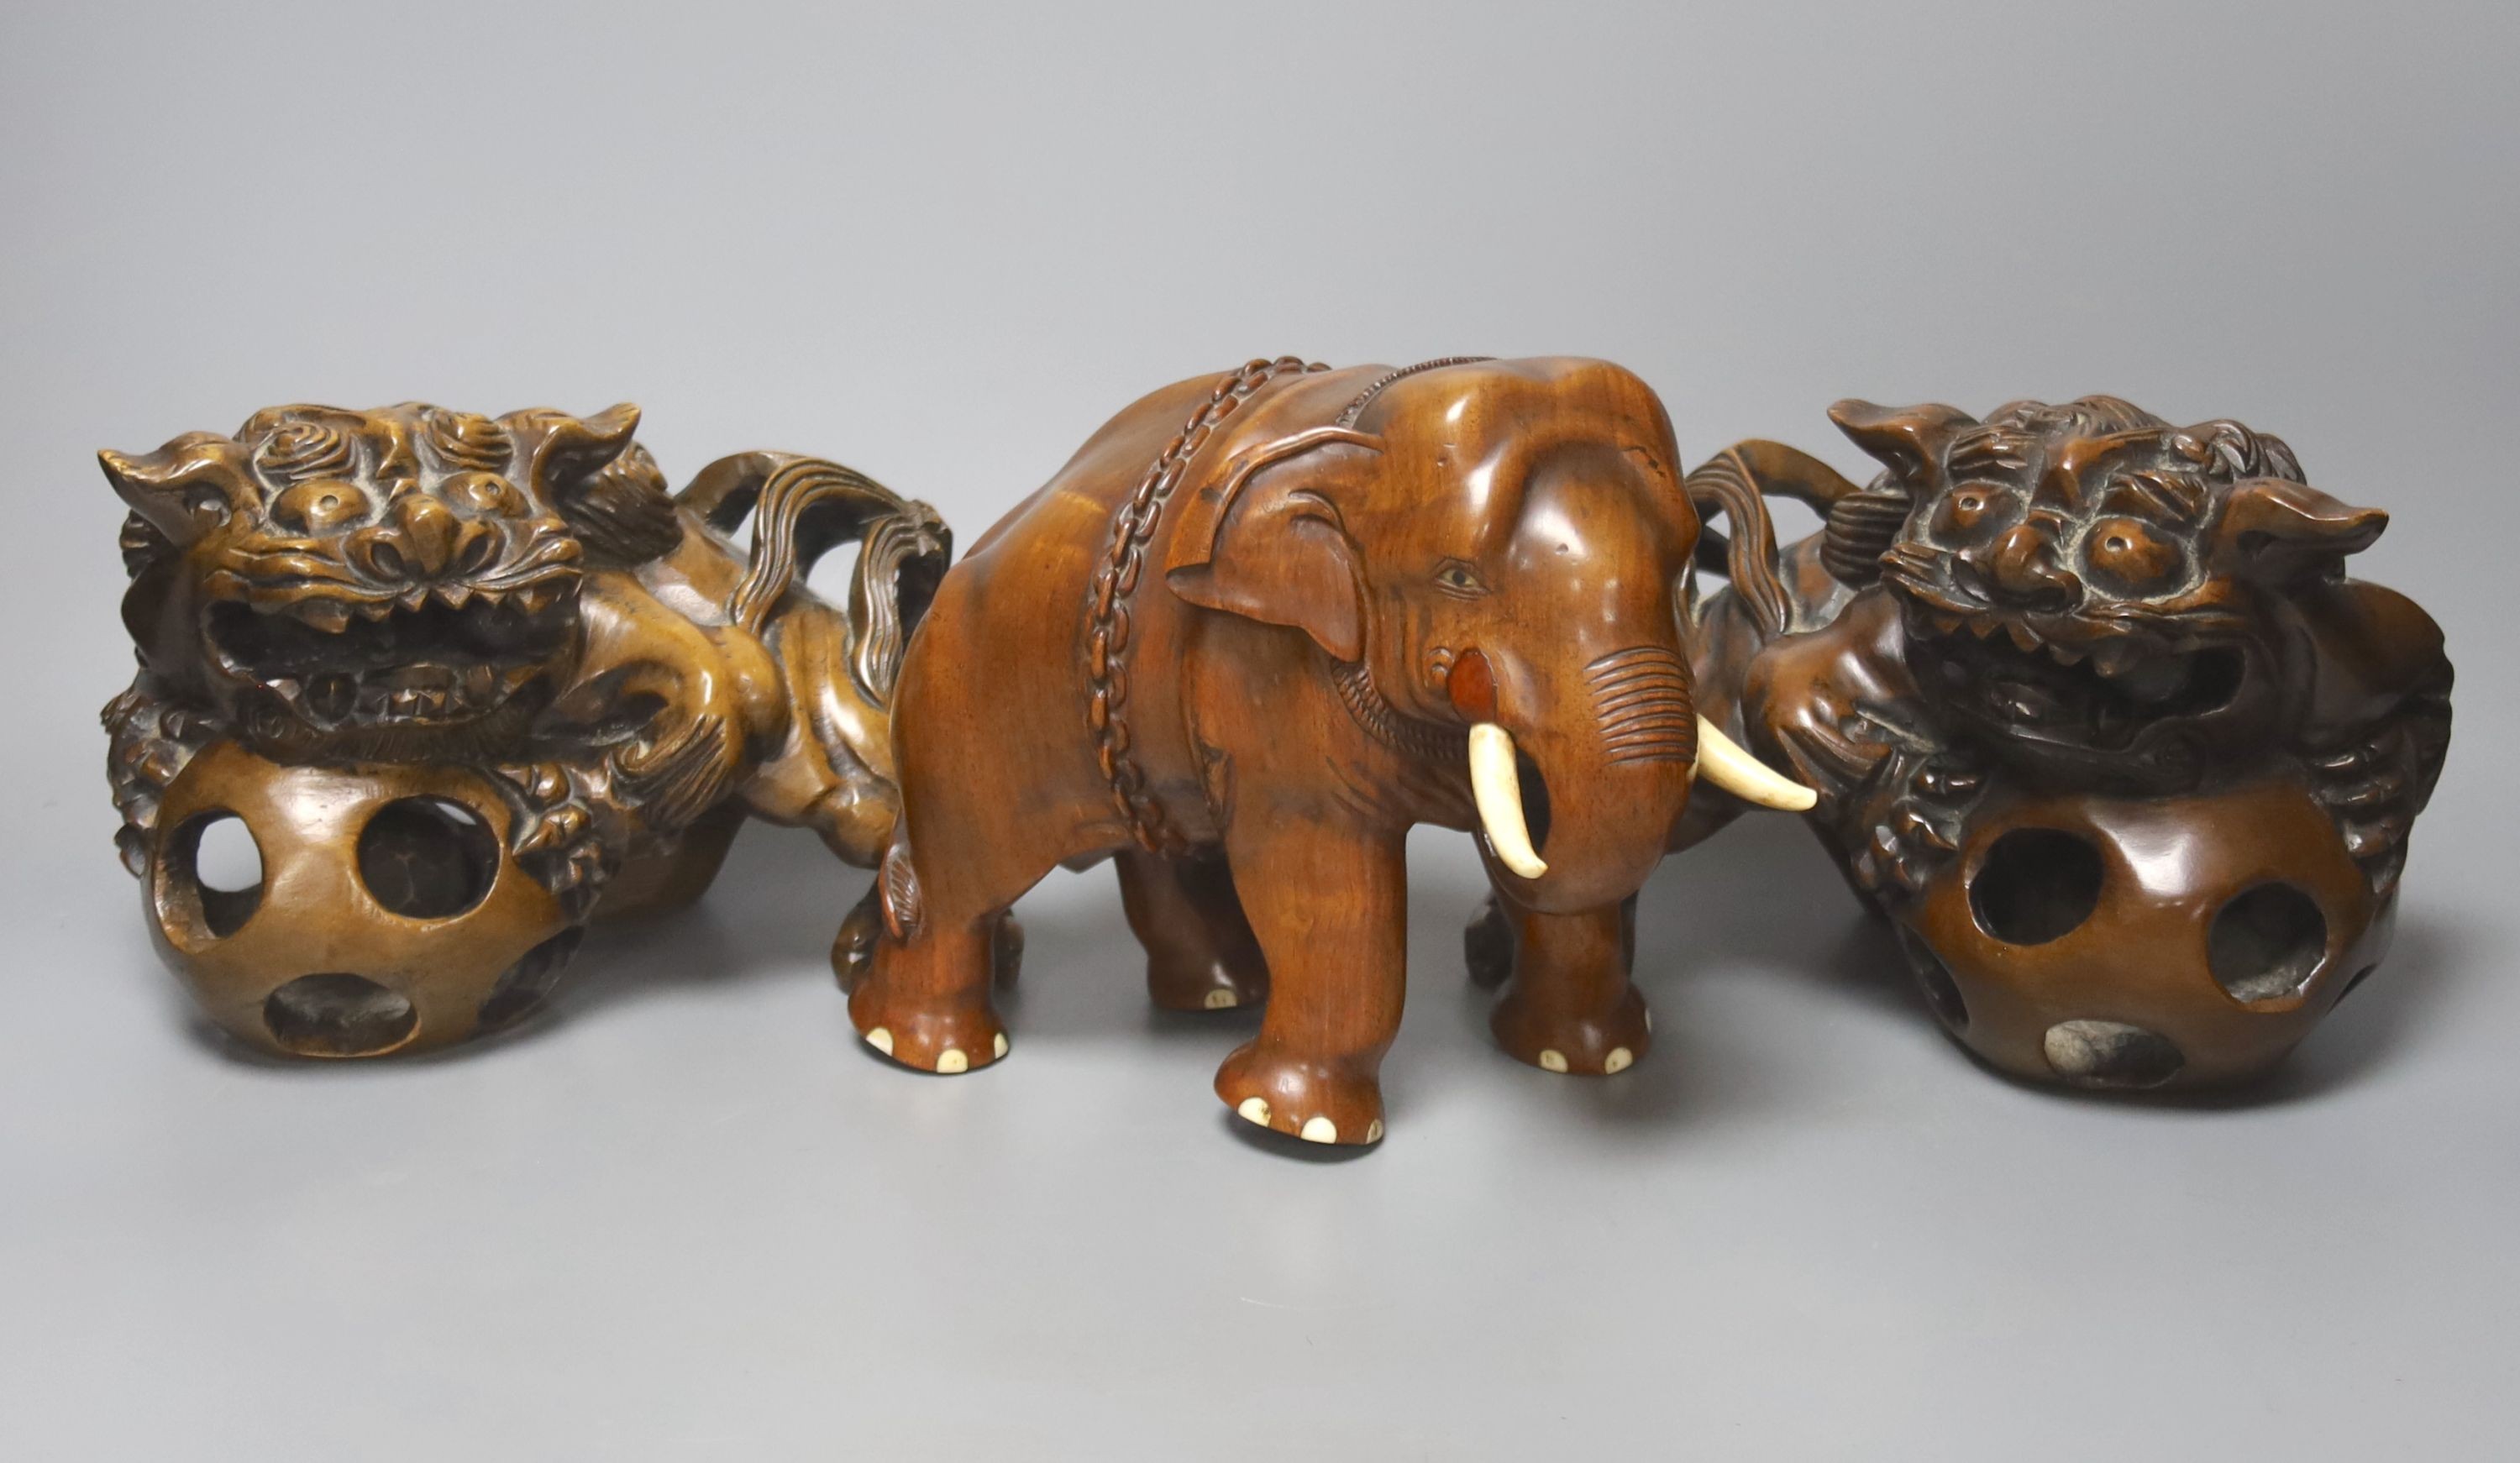 An Indian padouk wood figure of an elephant and a pair of wood figures of Buddhist lions 17cm